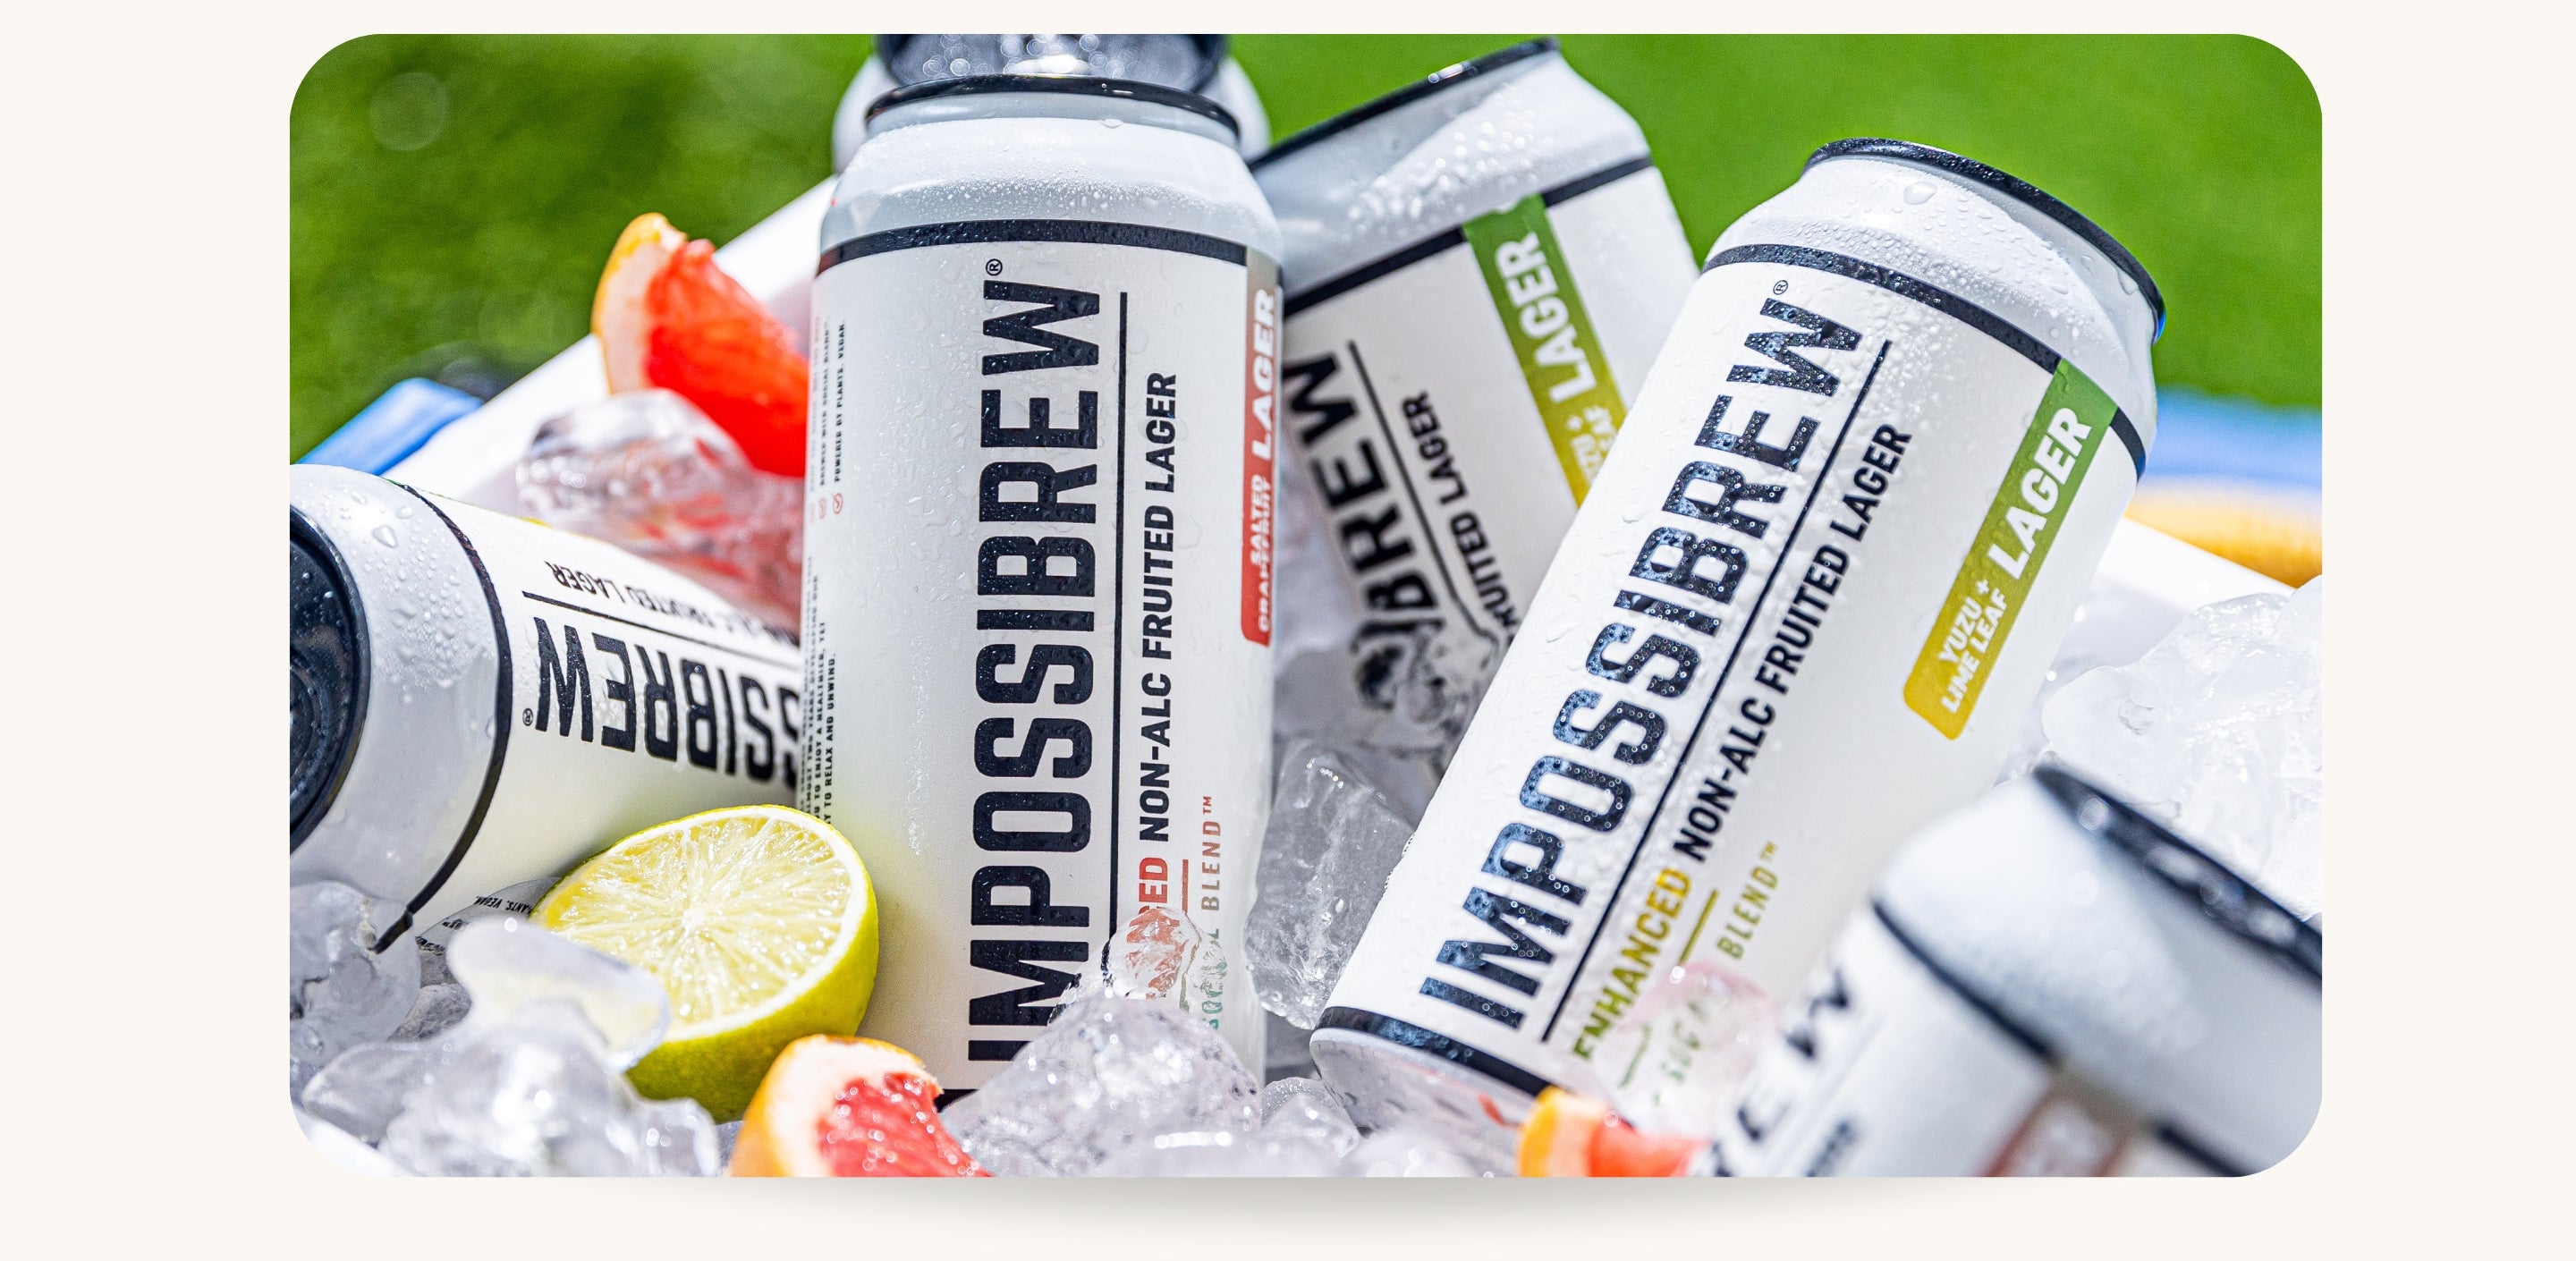 IMPOSSIBREW® Achieves 300% Growth in June, Outperforming Dry January.